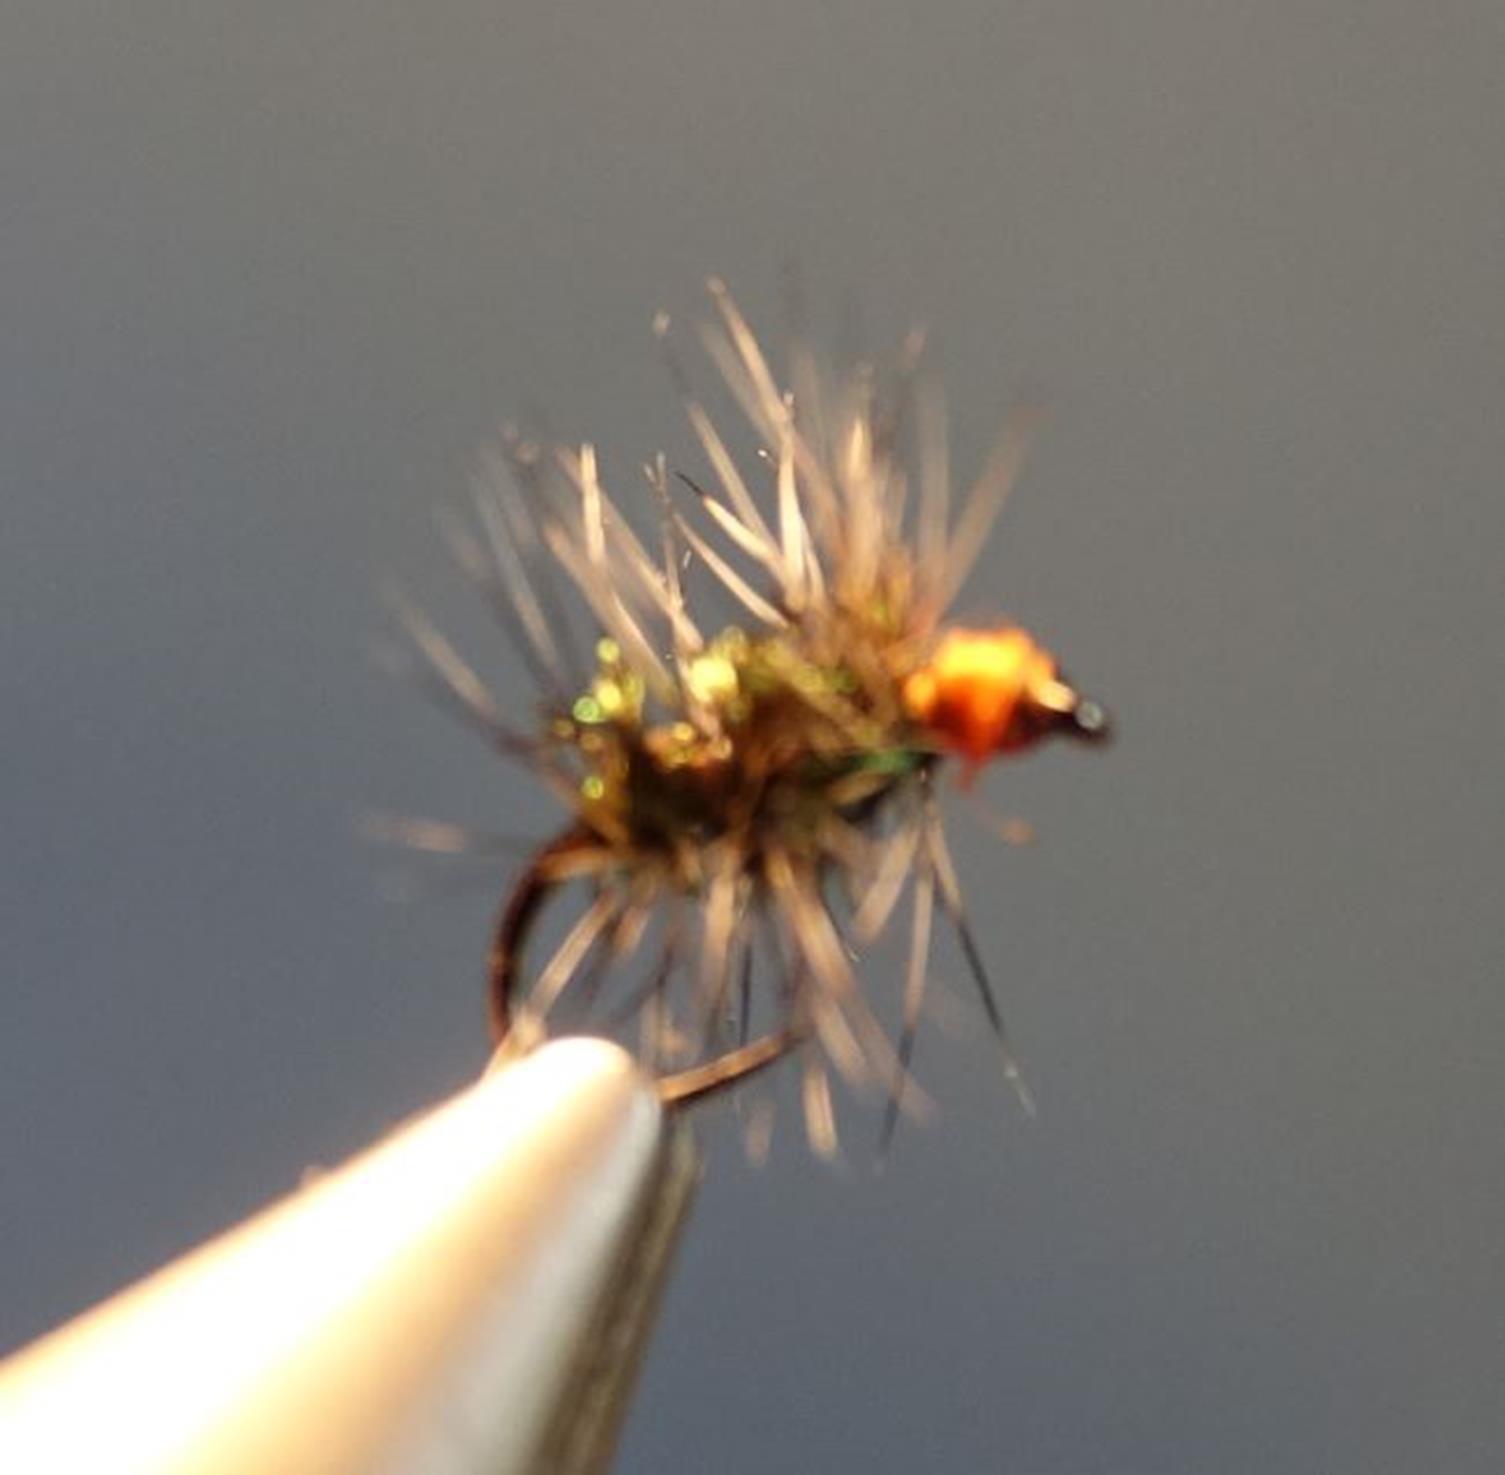 Gnat herl paon hackle grizzly mouche fly tying eclosion